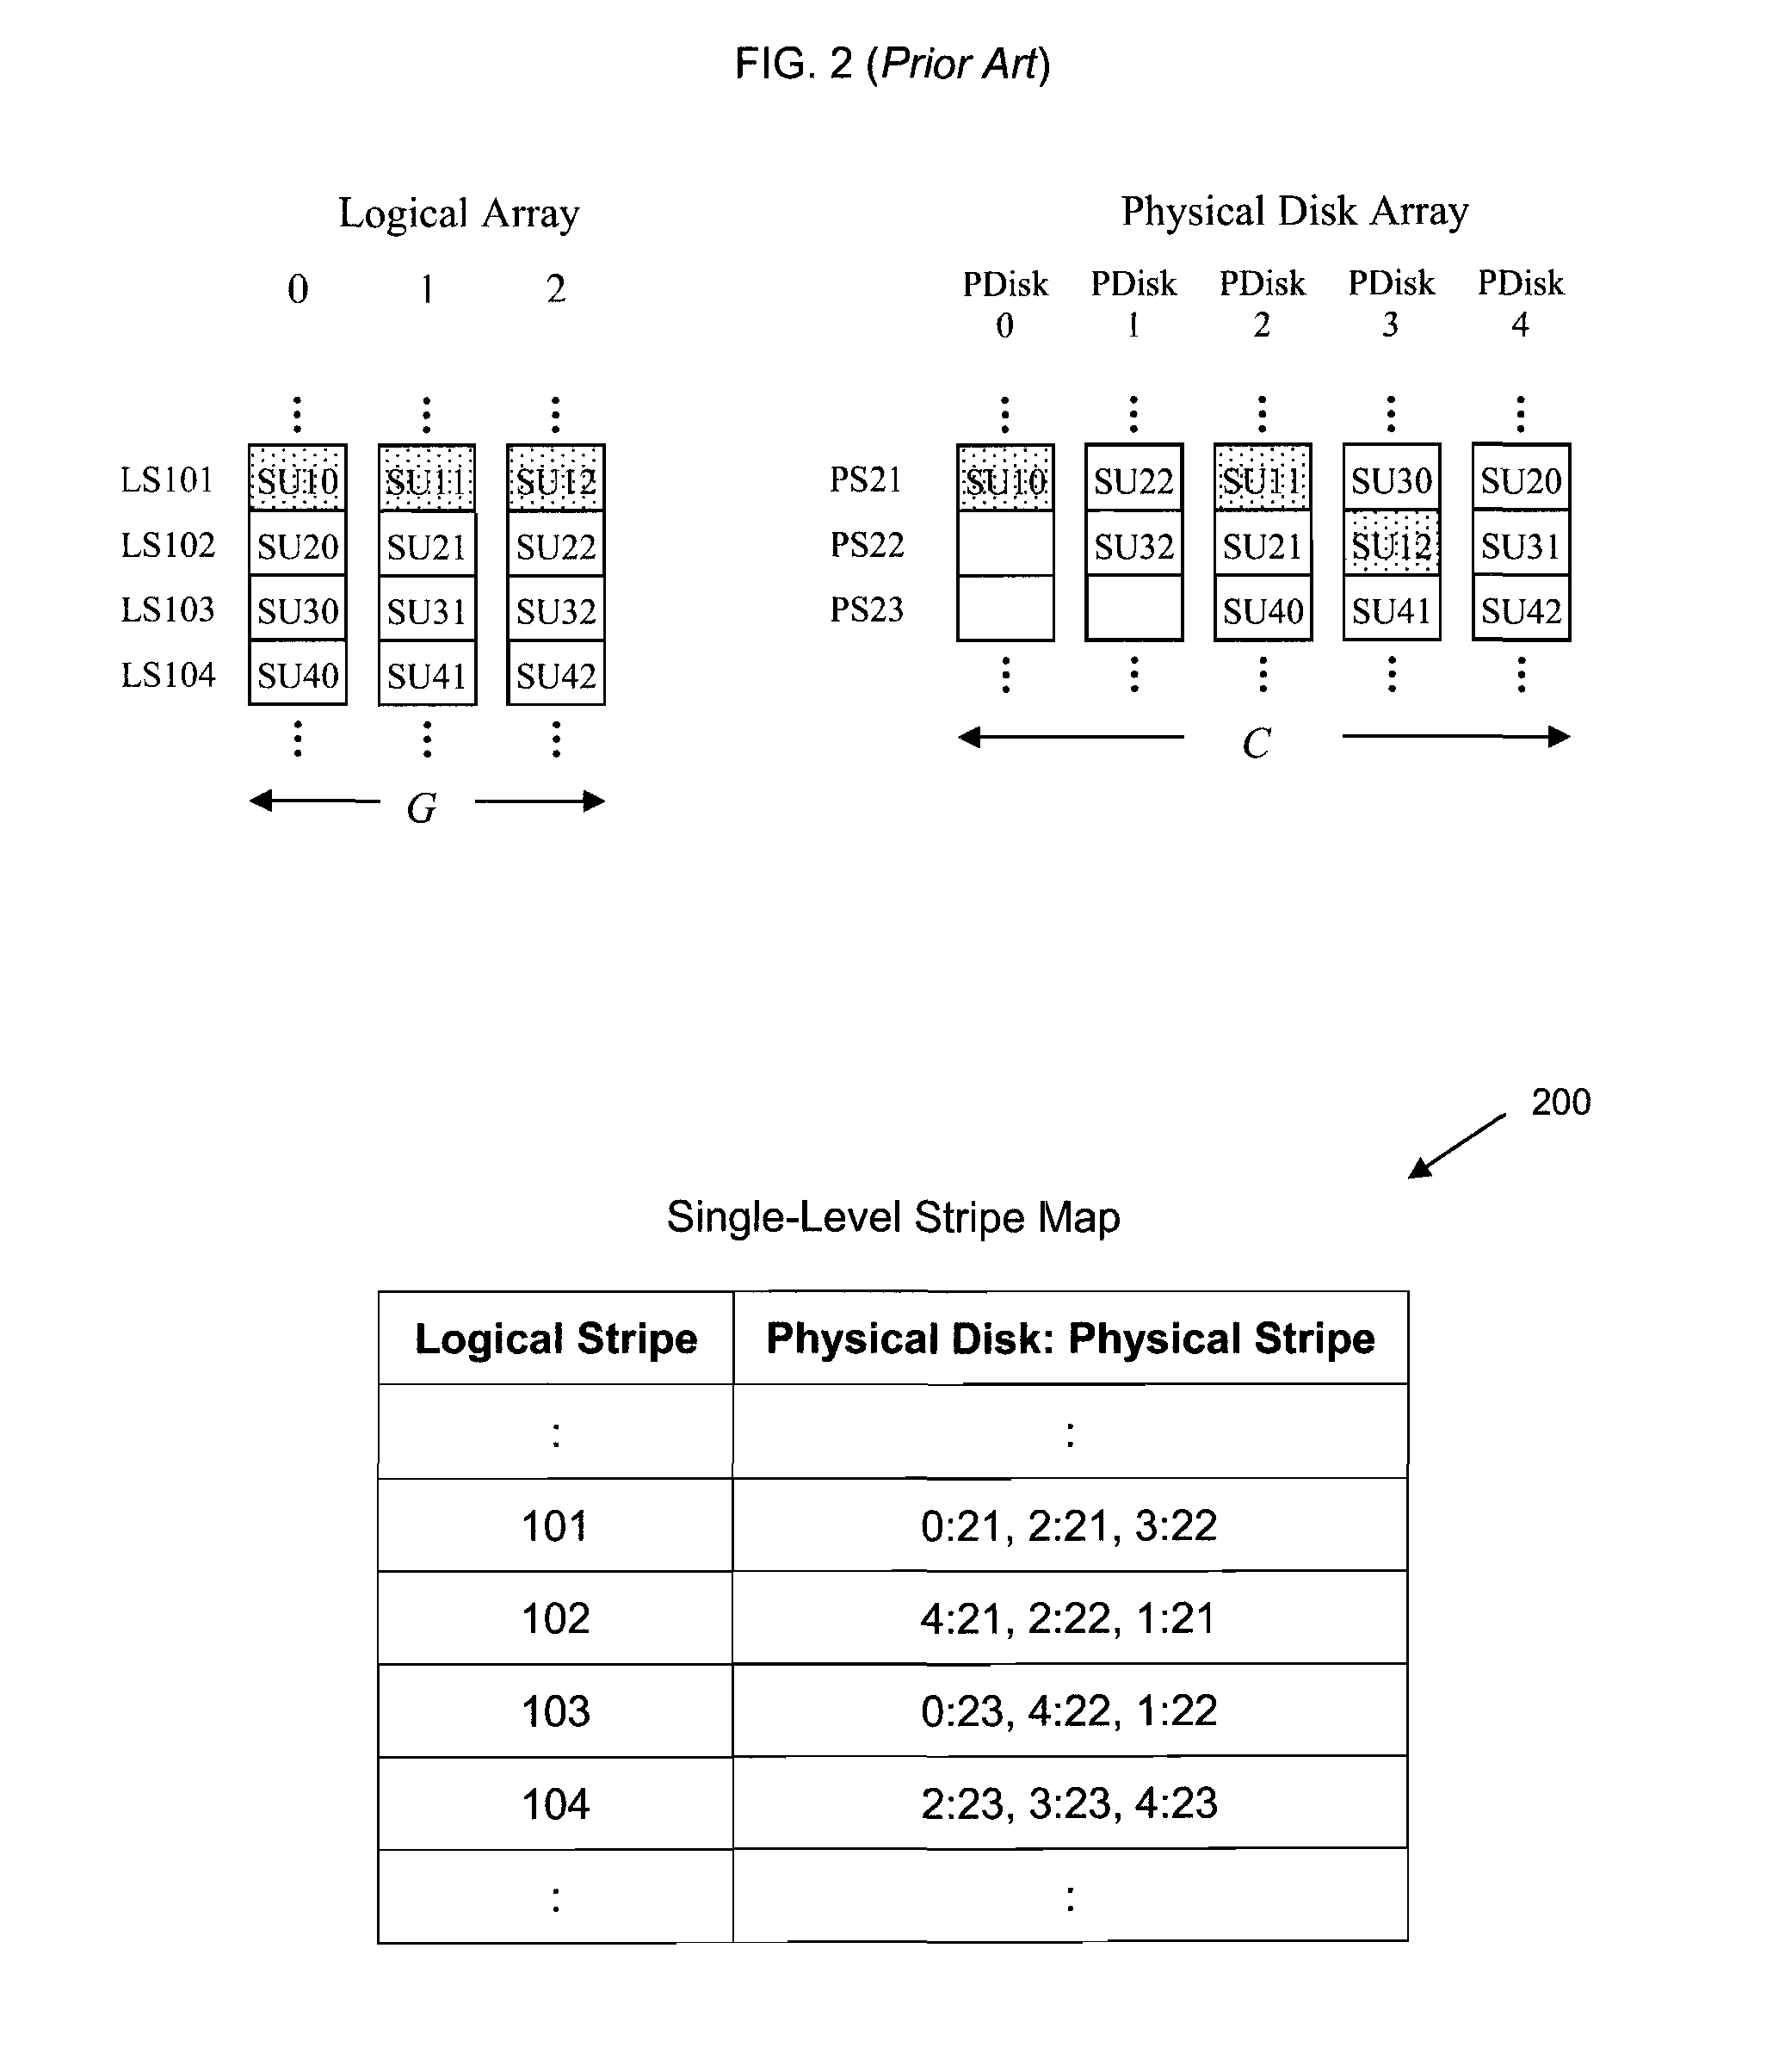 Parity declustered storage device array with partition groups